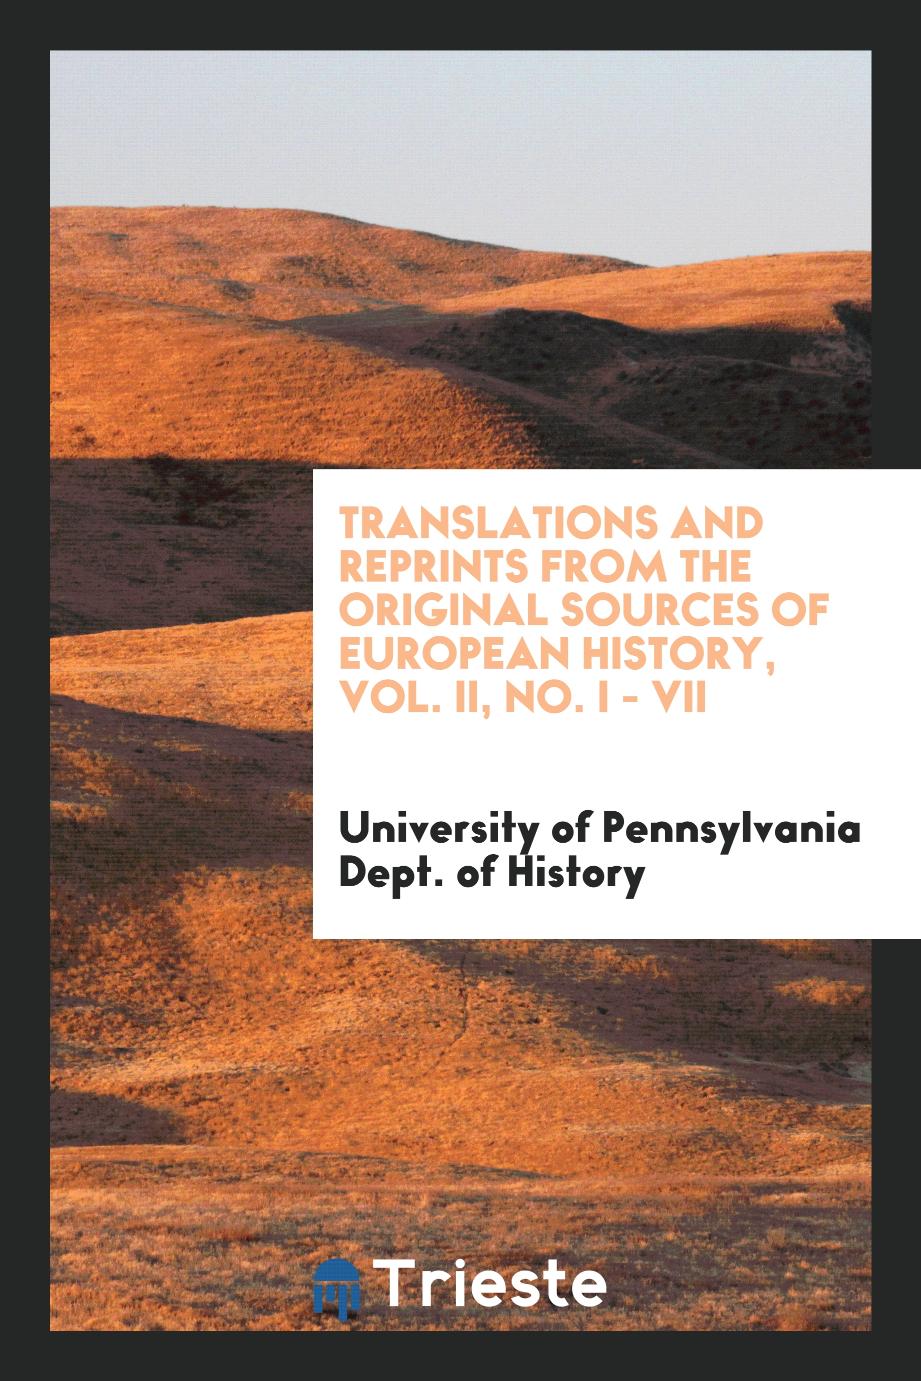 Translations and reprints from the original sources of European history, Vol. II, No. I - VII